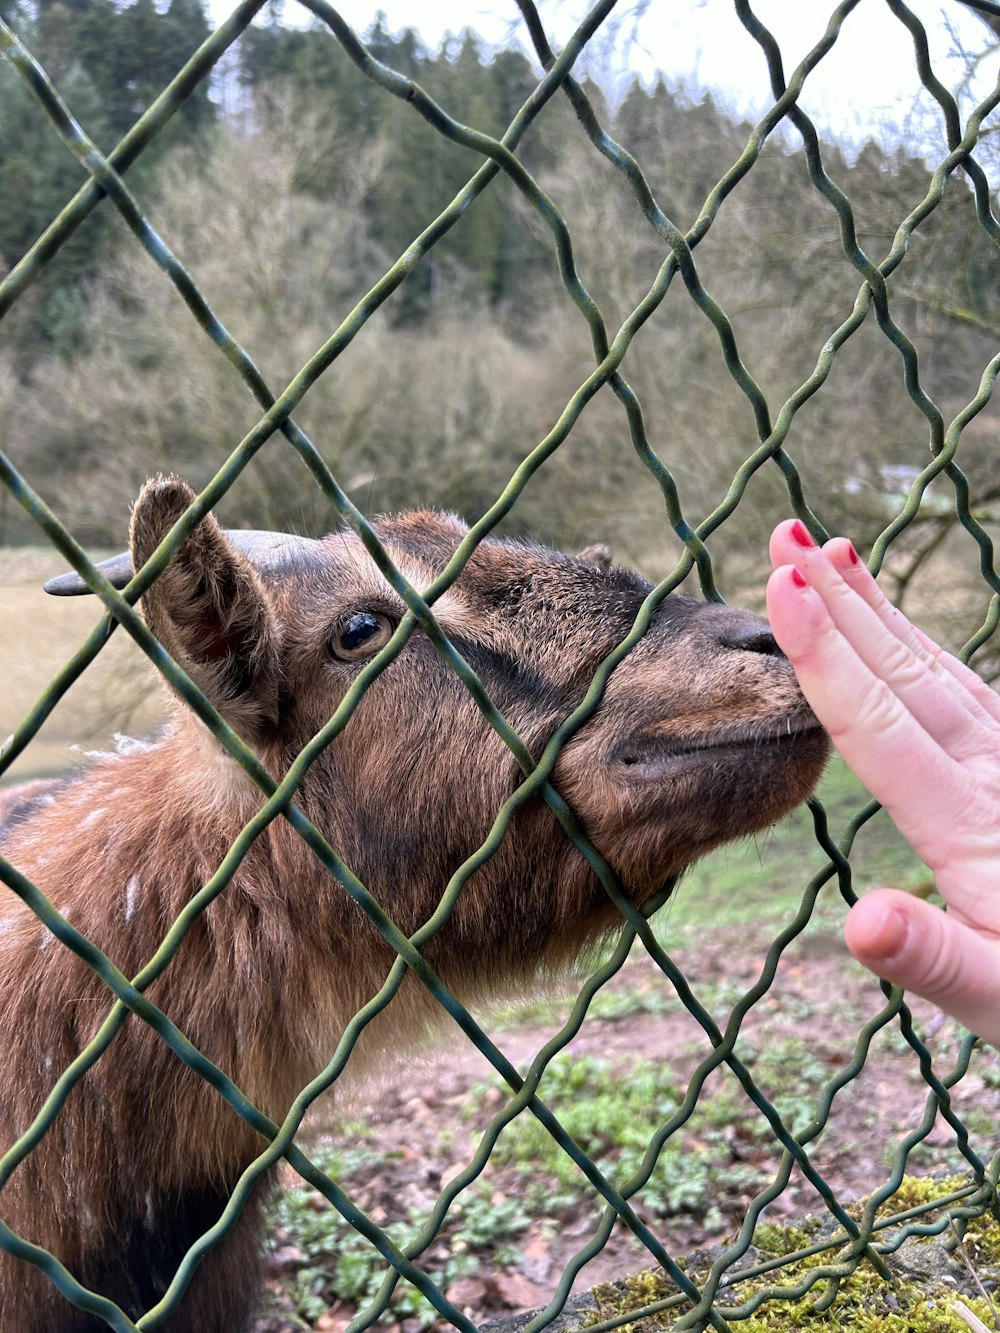 a hand reaching out towards a goat through a fence